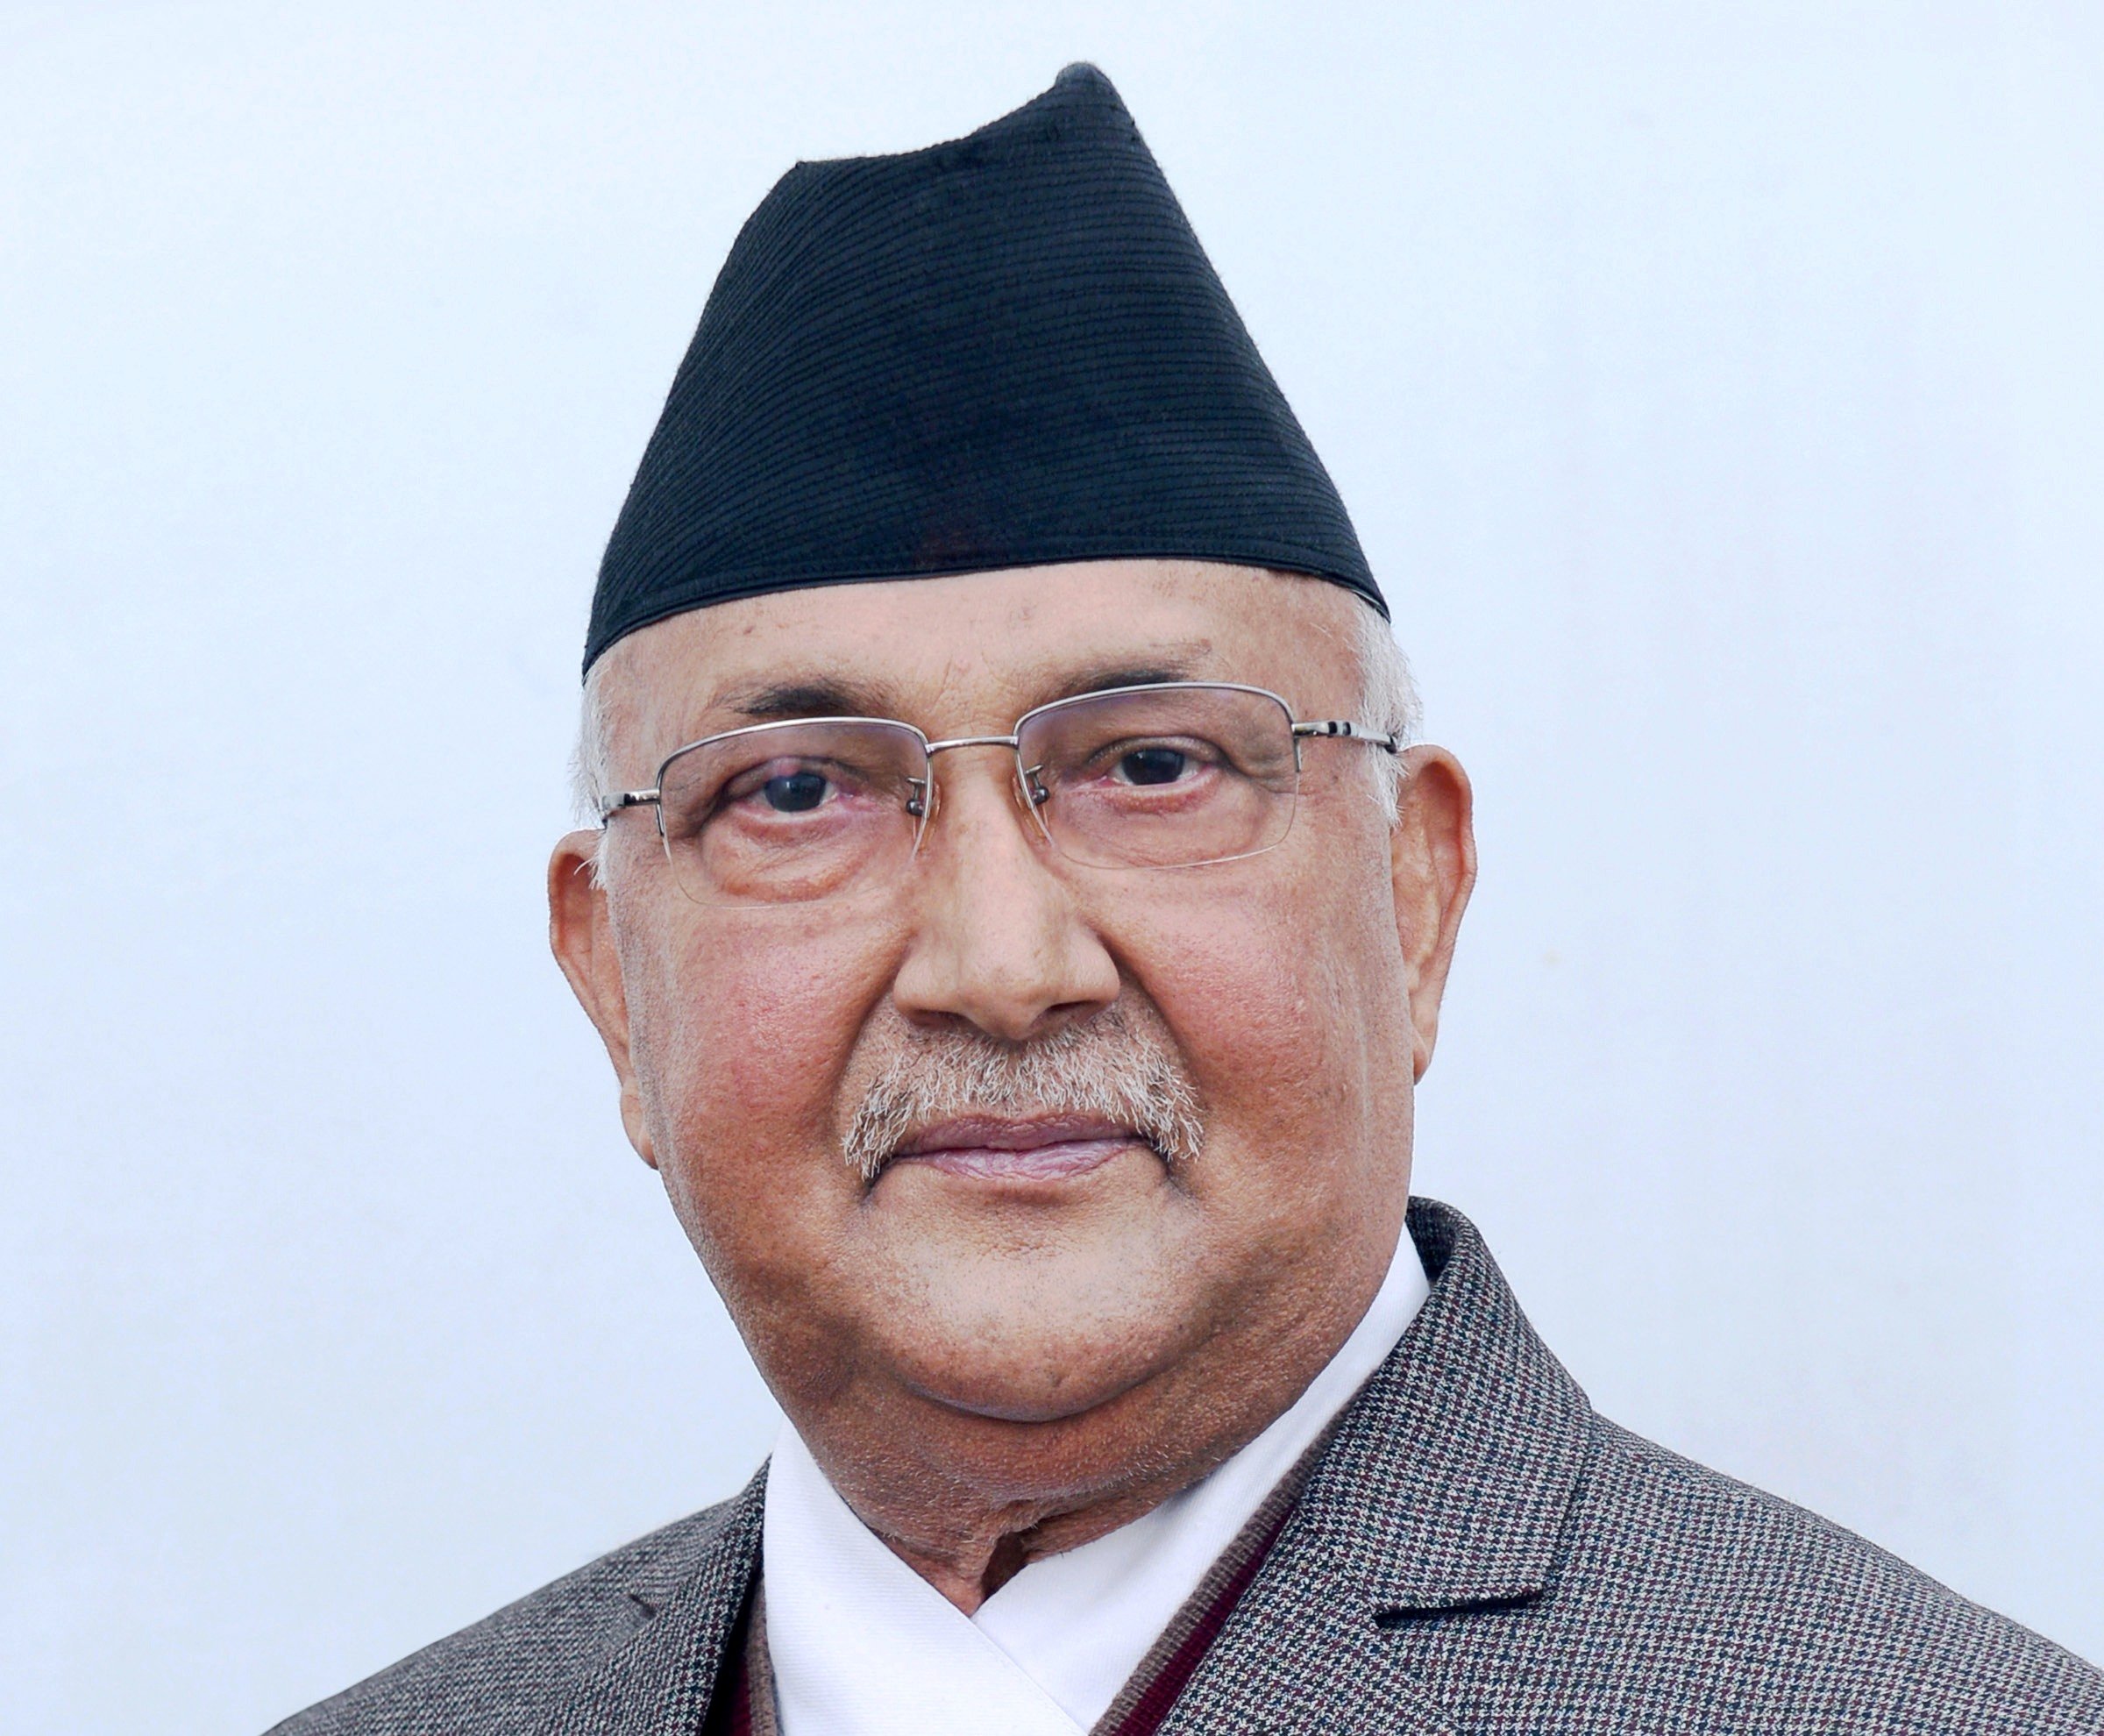 not-appropriate-to-take-any-wrong-decision-in-haste-prime-minister-oli